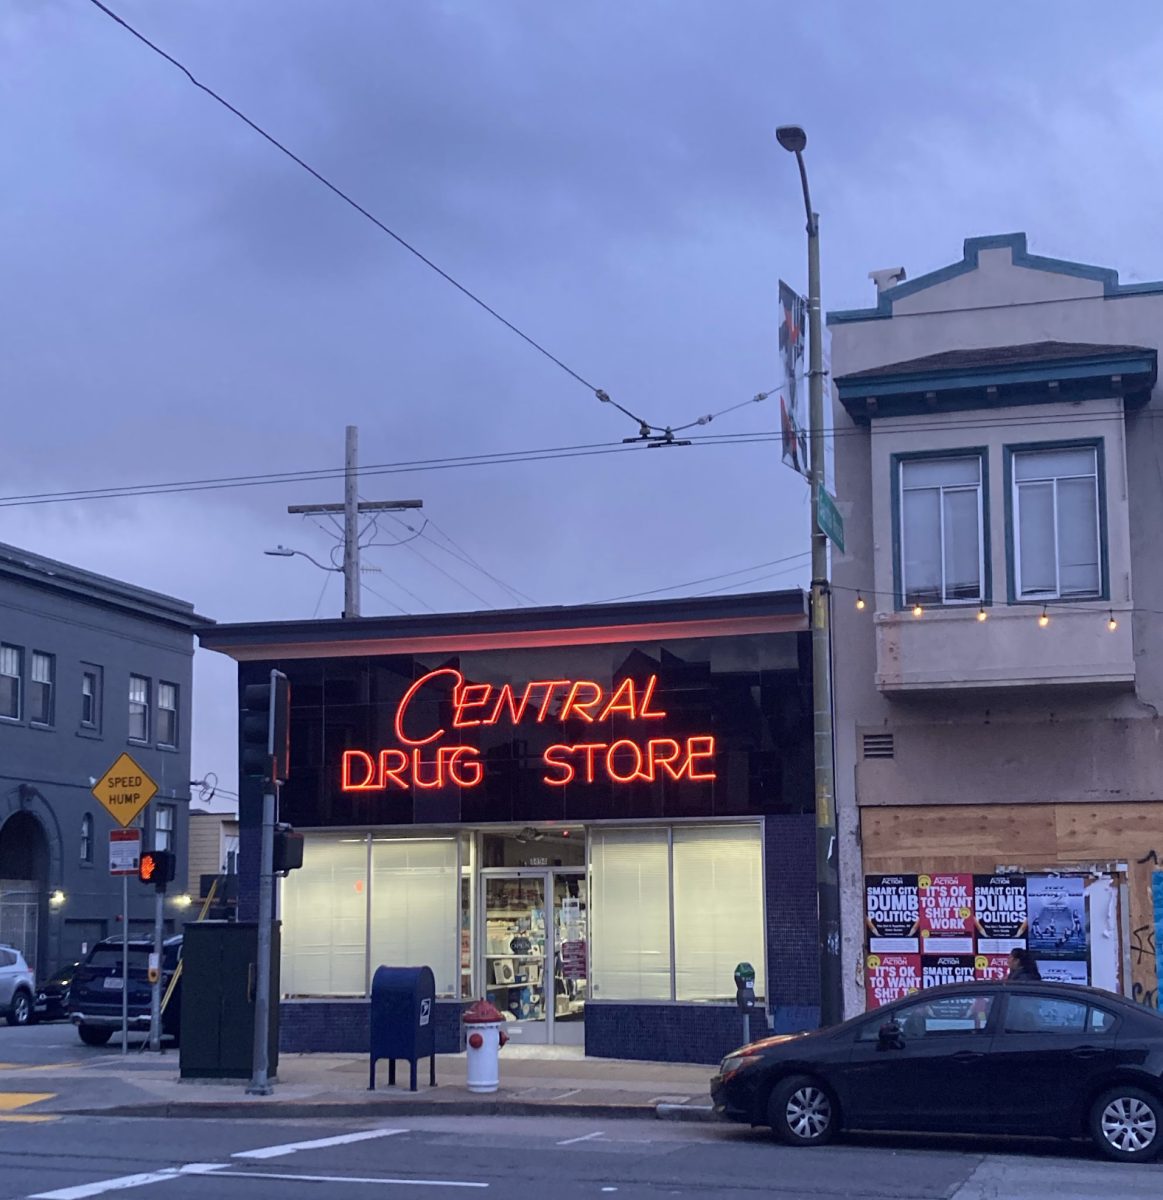 Central Drug Store, located in the Excelsior District, has operated since 1908.